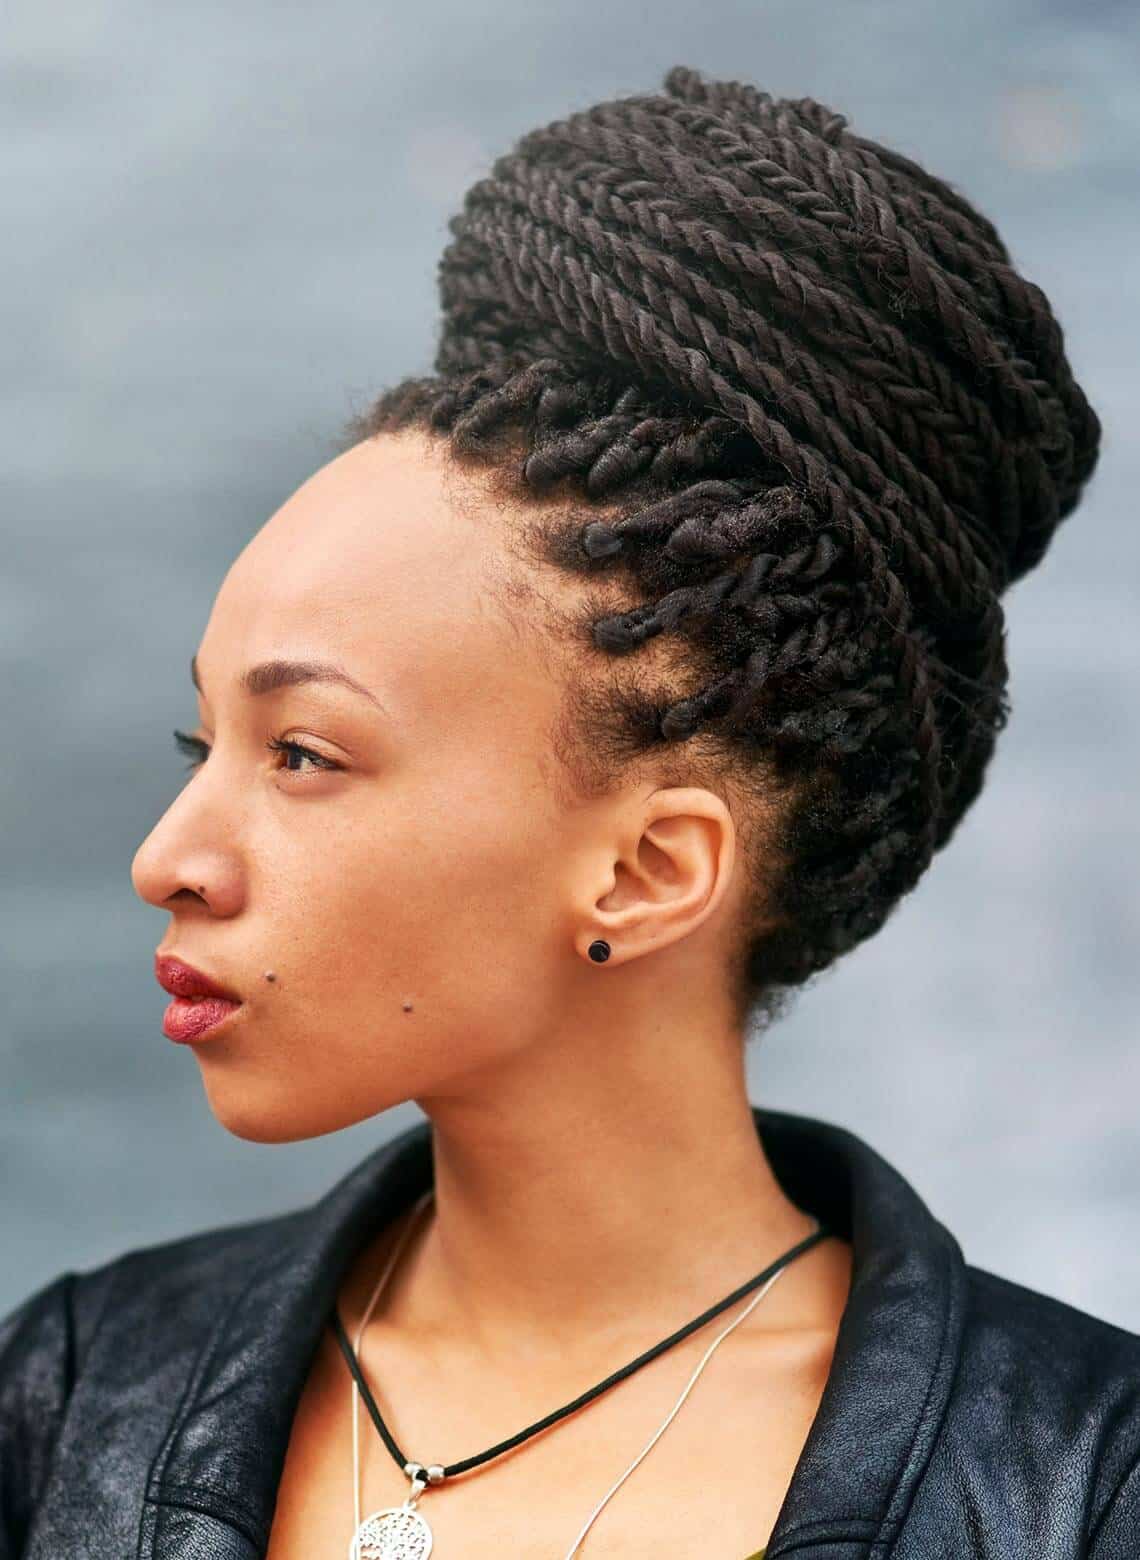 profile of person with Senegalese twists wrapped in a bun, wearing black stud earrings, a couple necklaces, a black leather jacket, and berry-colored lipstick